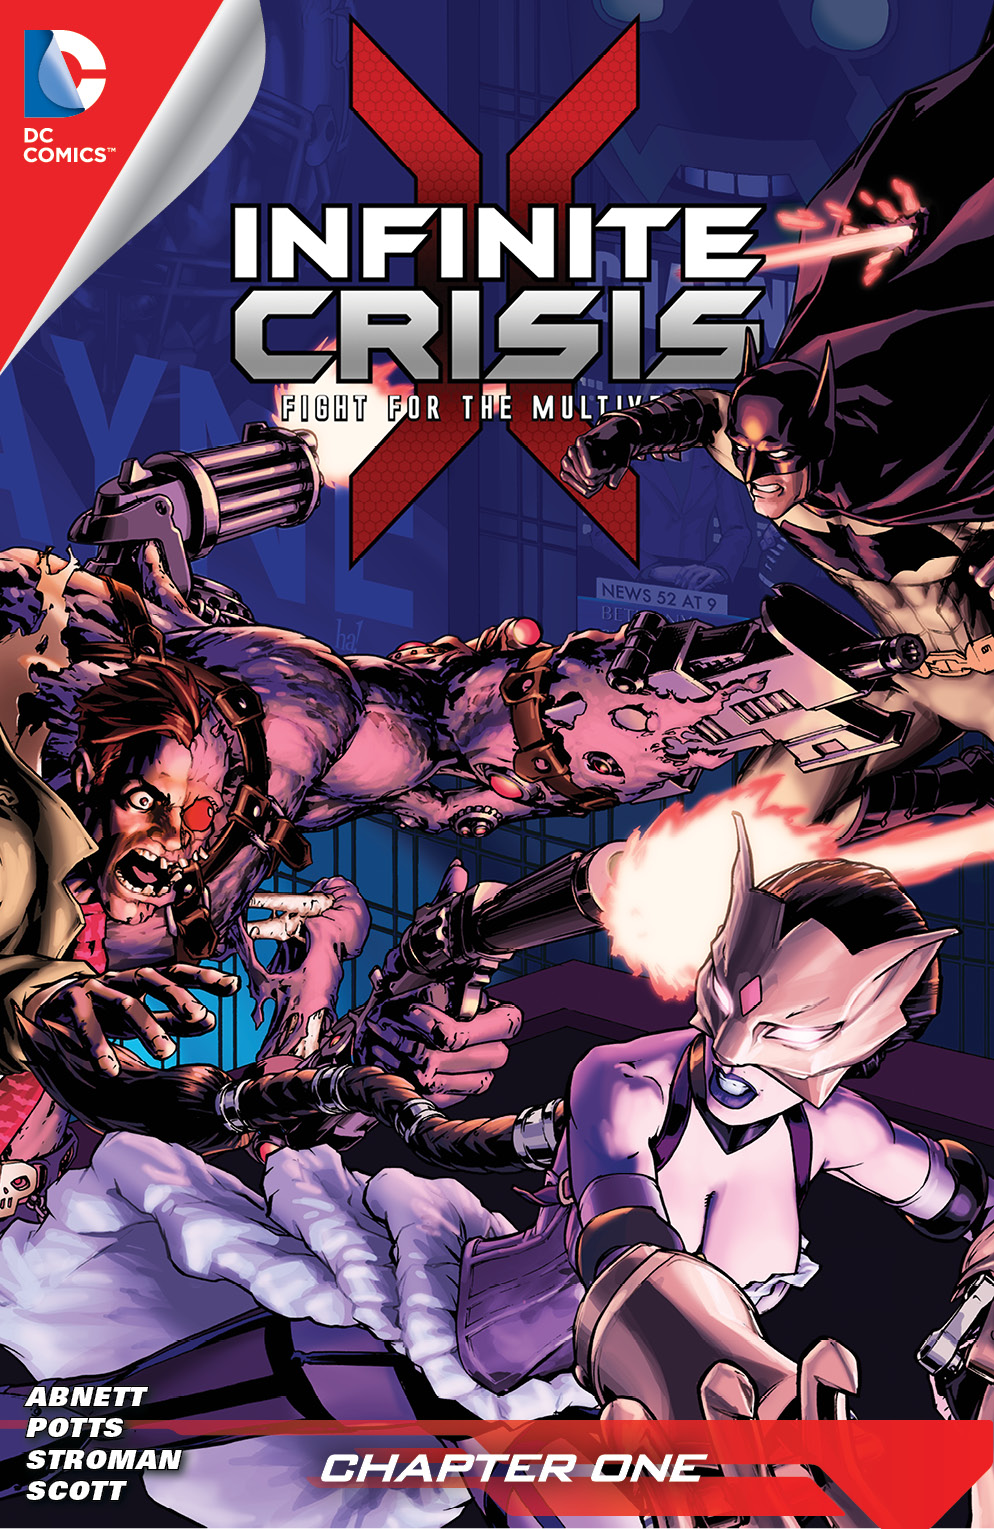 Infinite Crisis: Fight for the Multiverse #1 preview images